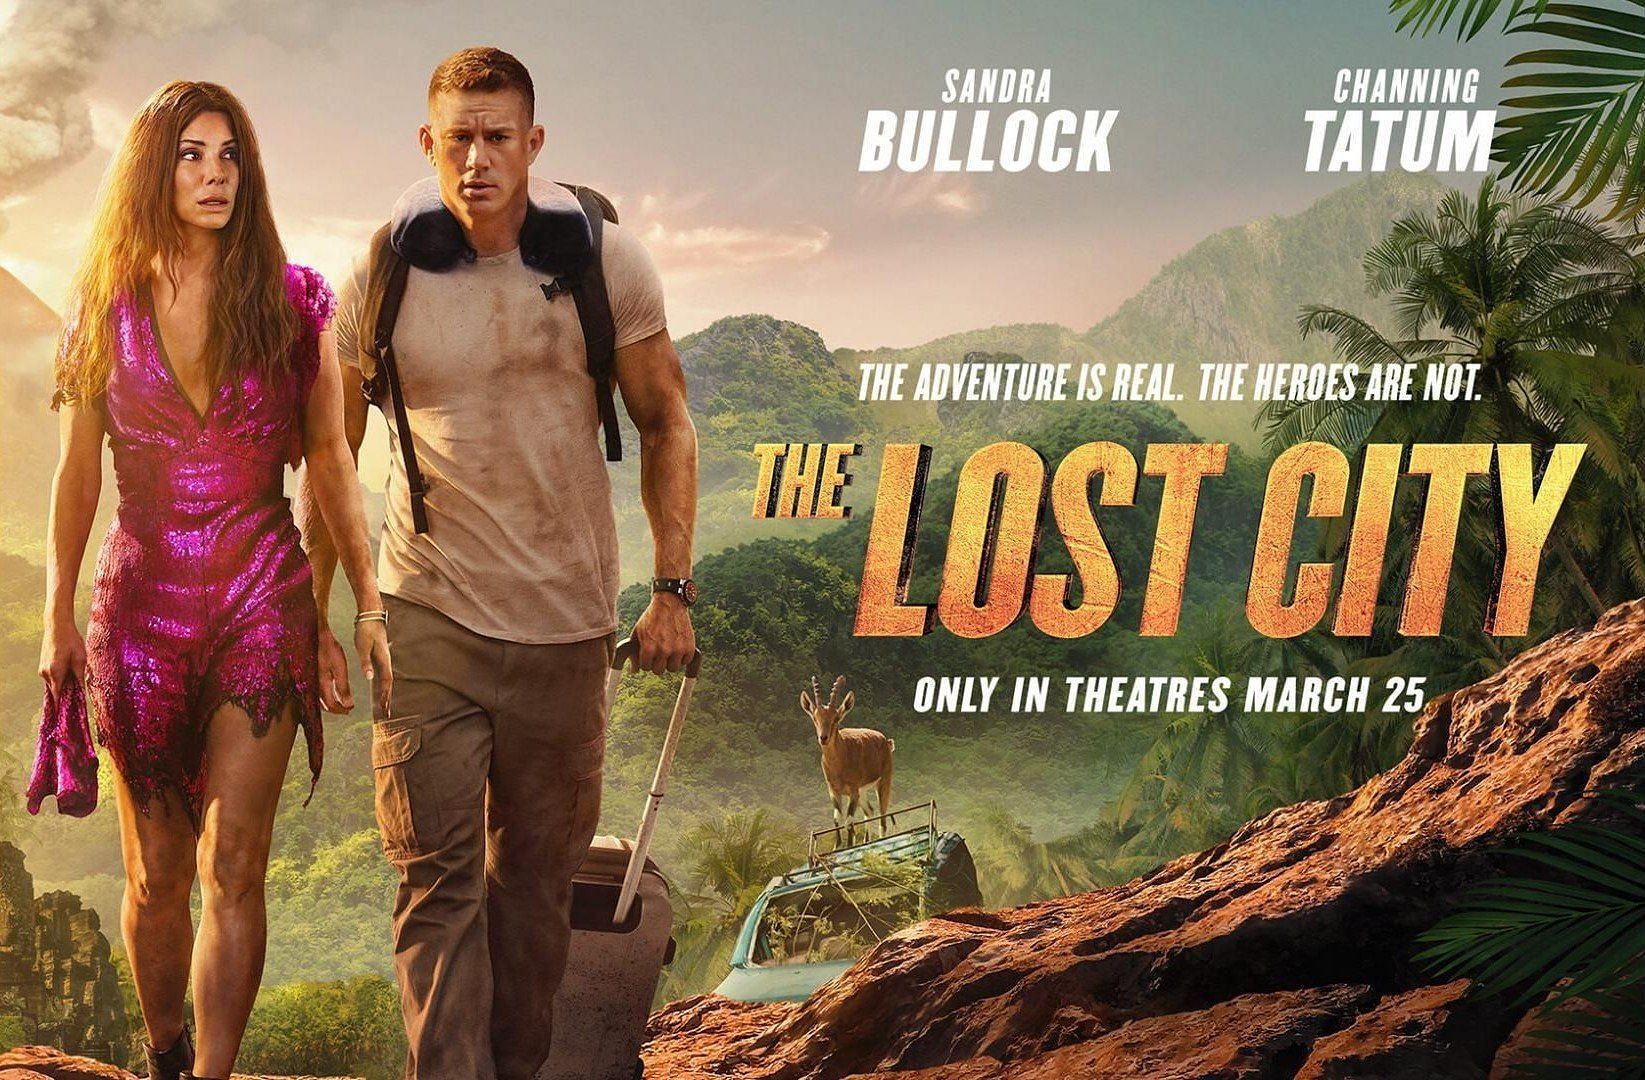 The Lost City (Image via Paramount Pictures)